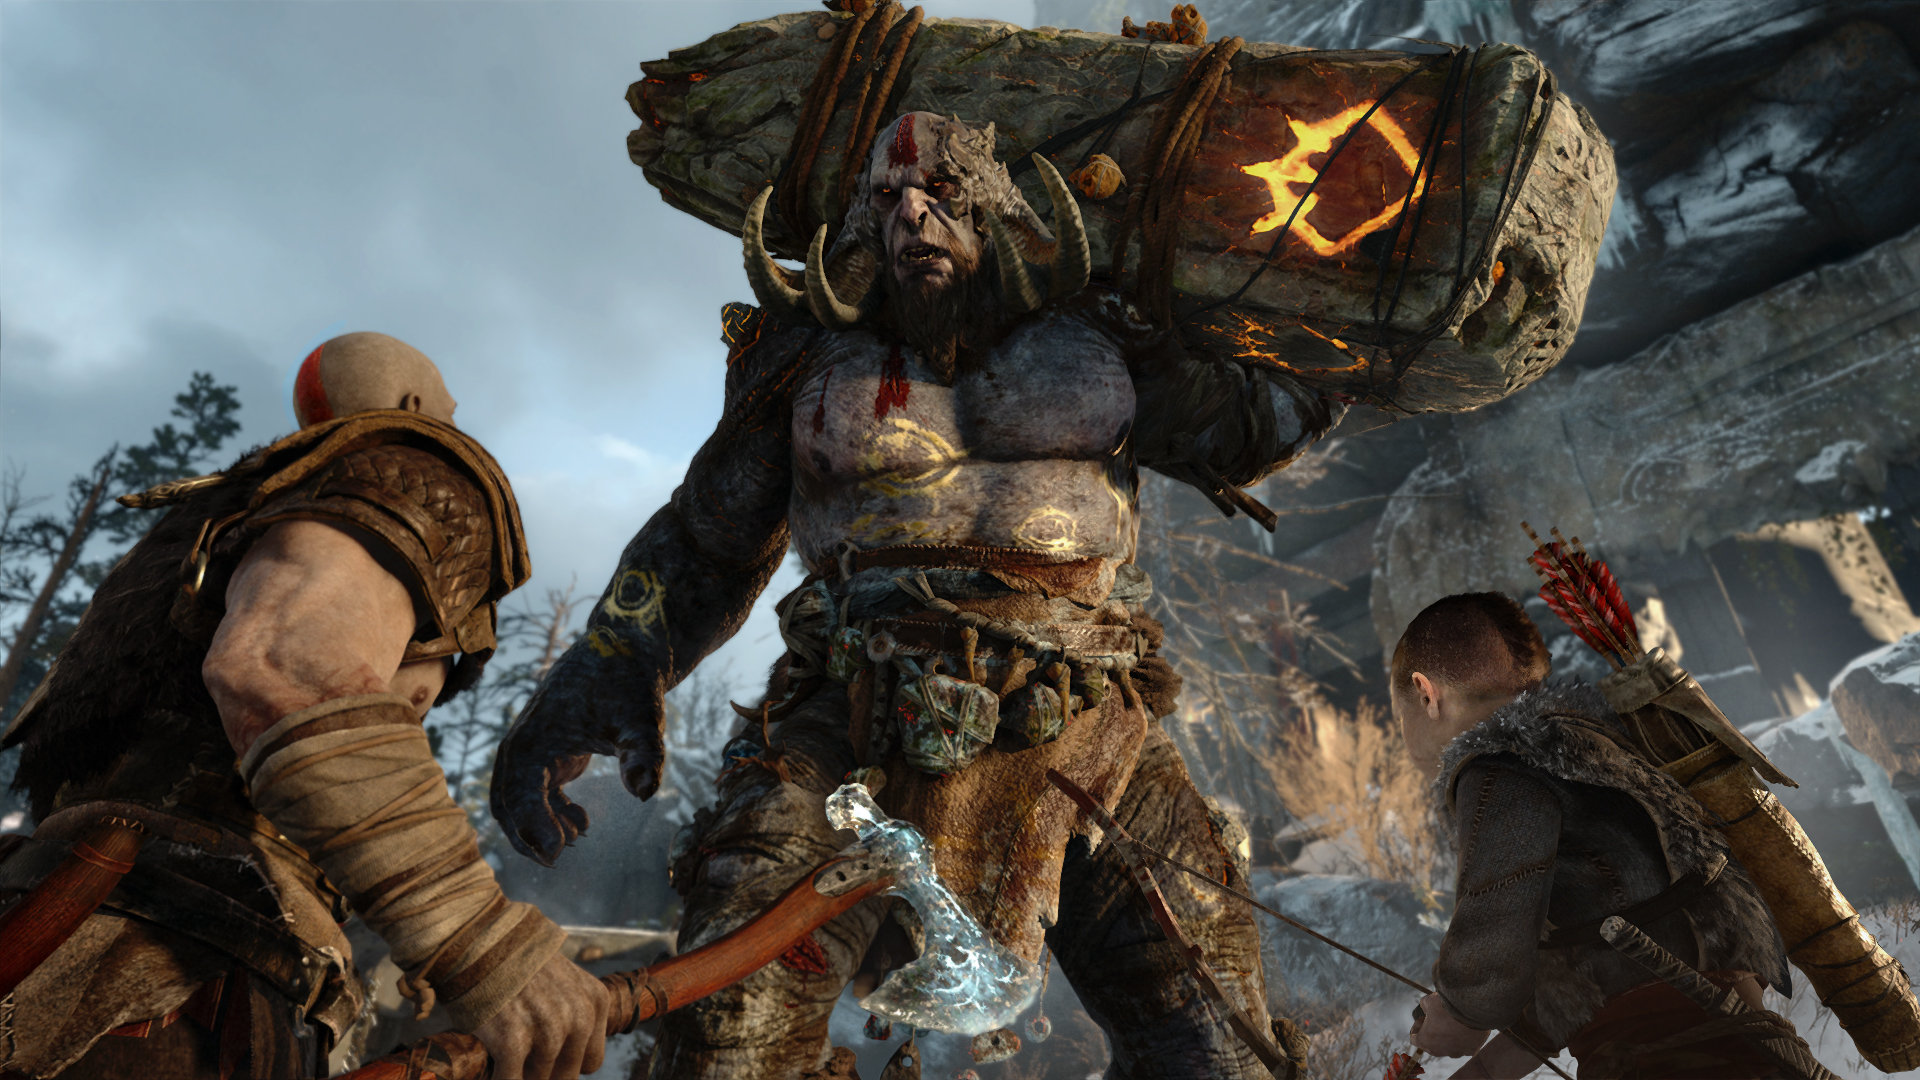 Download Walkthrough PS God Of War II Kratos GOW android on PC